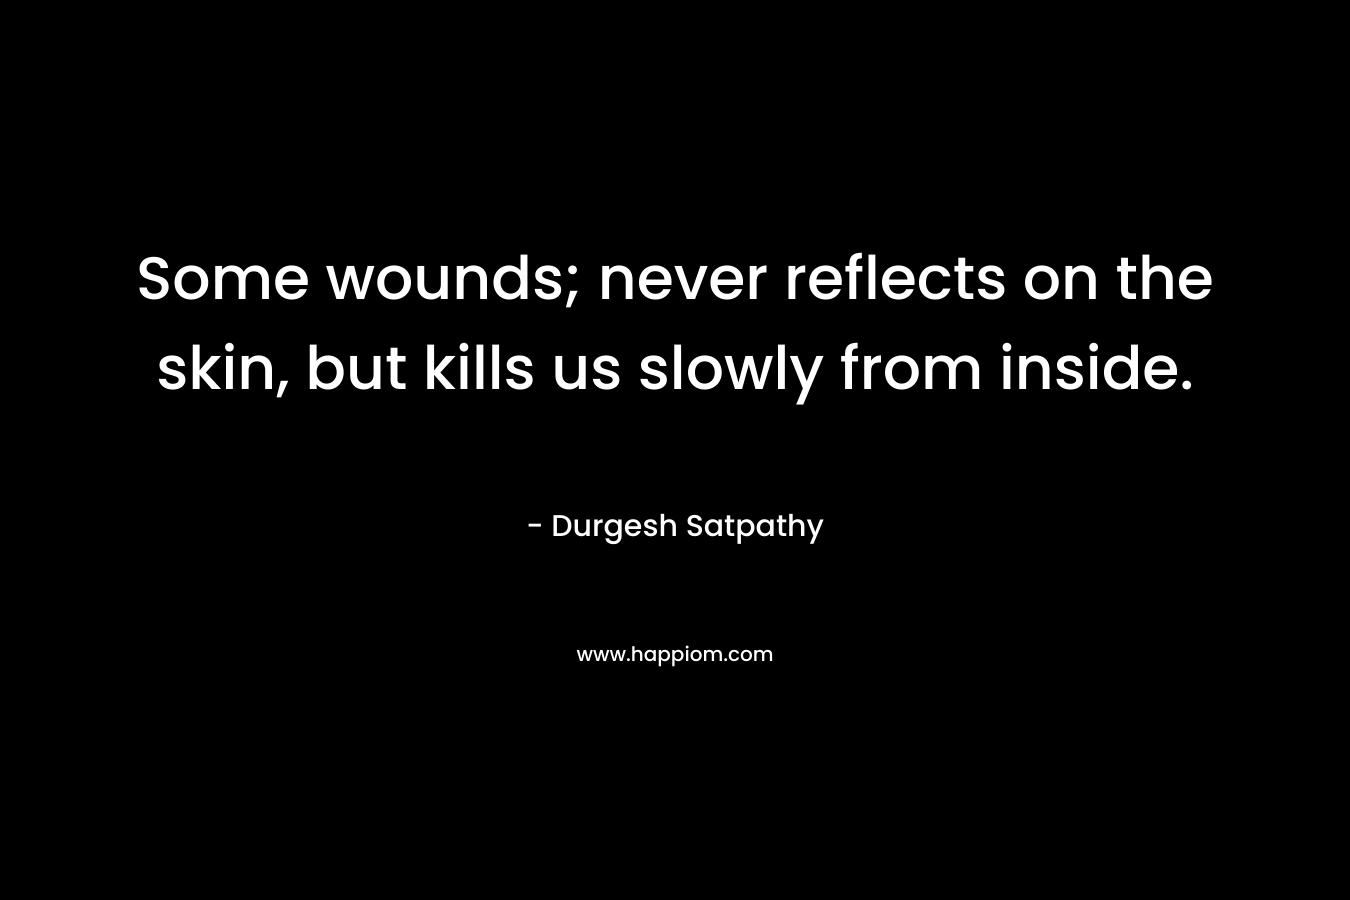 Some wounds; never reflects on the skin, but kills us slowly from inside. – Durgesh Satpathy